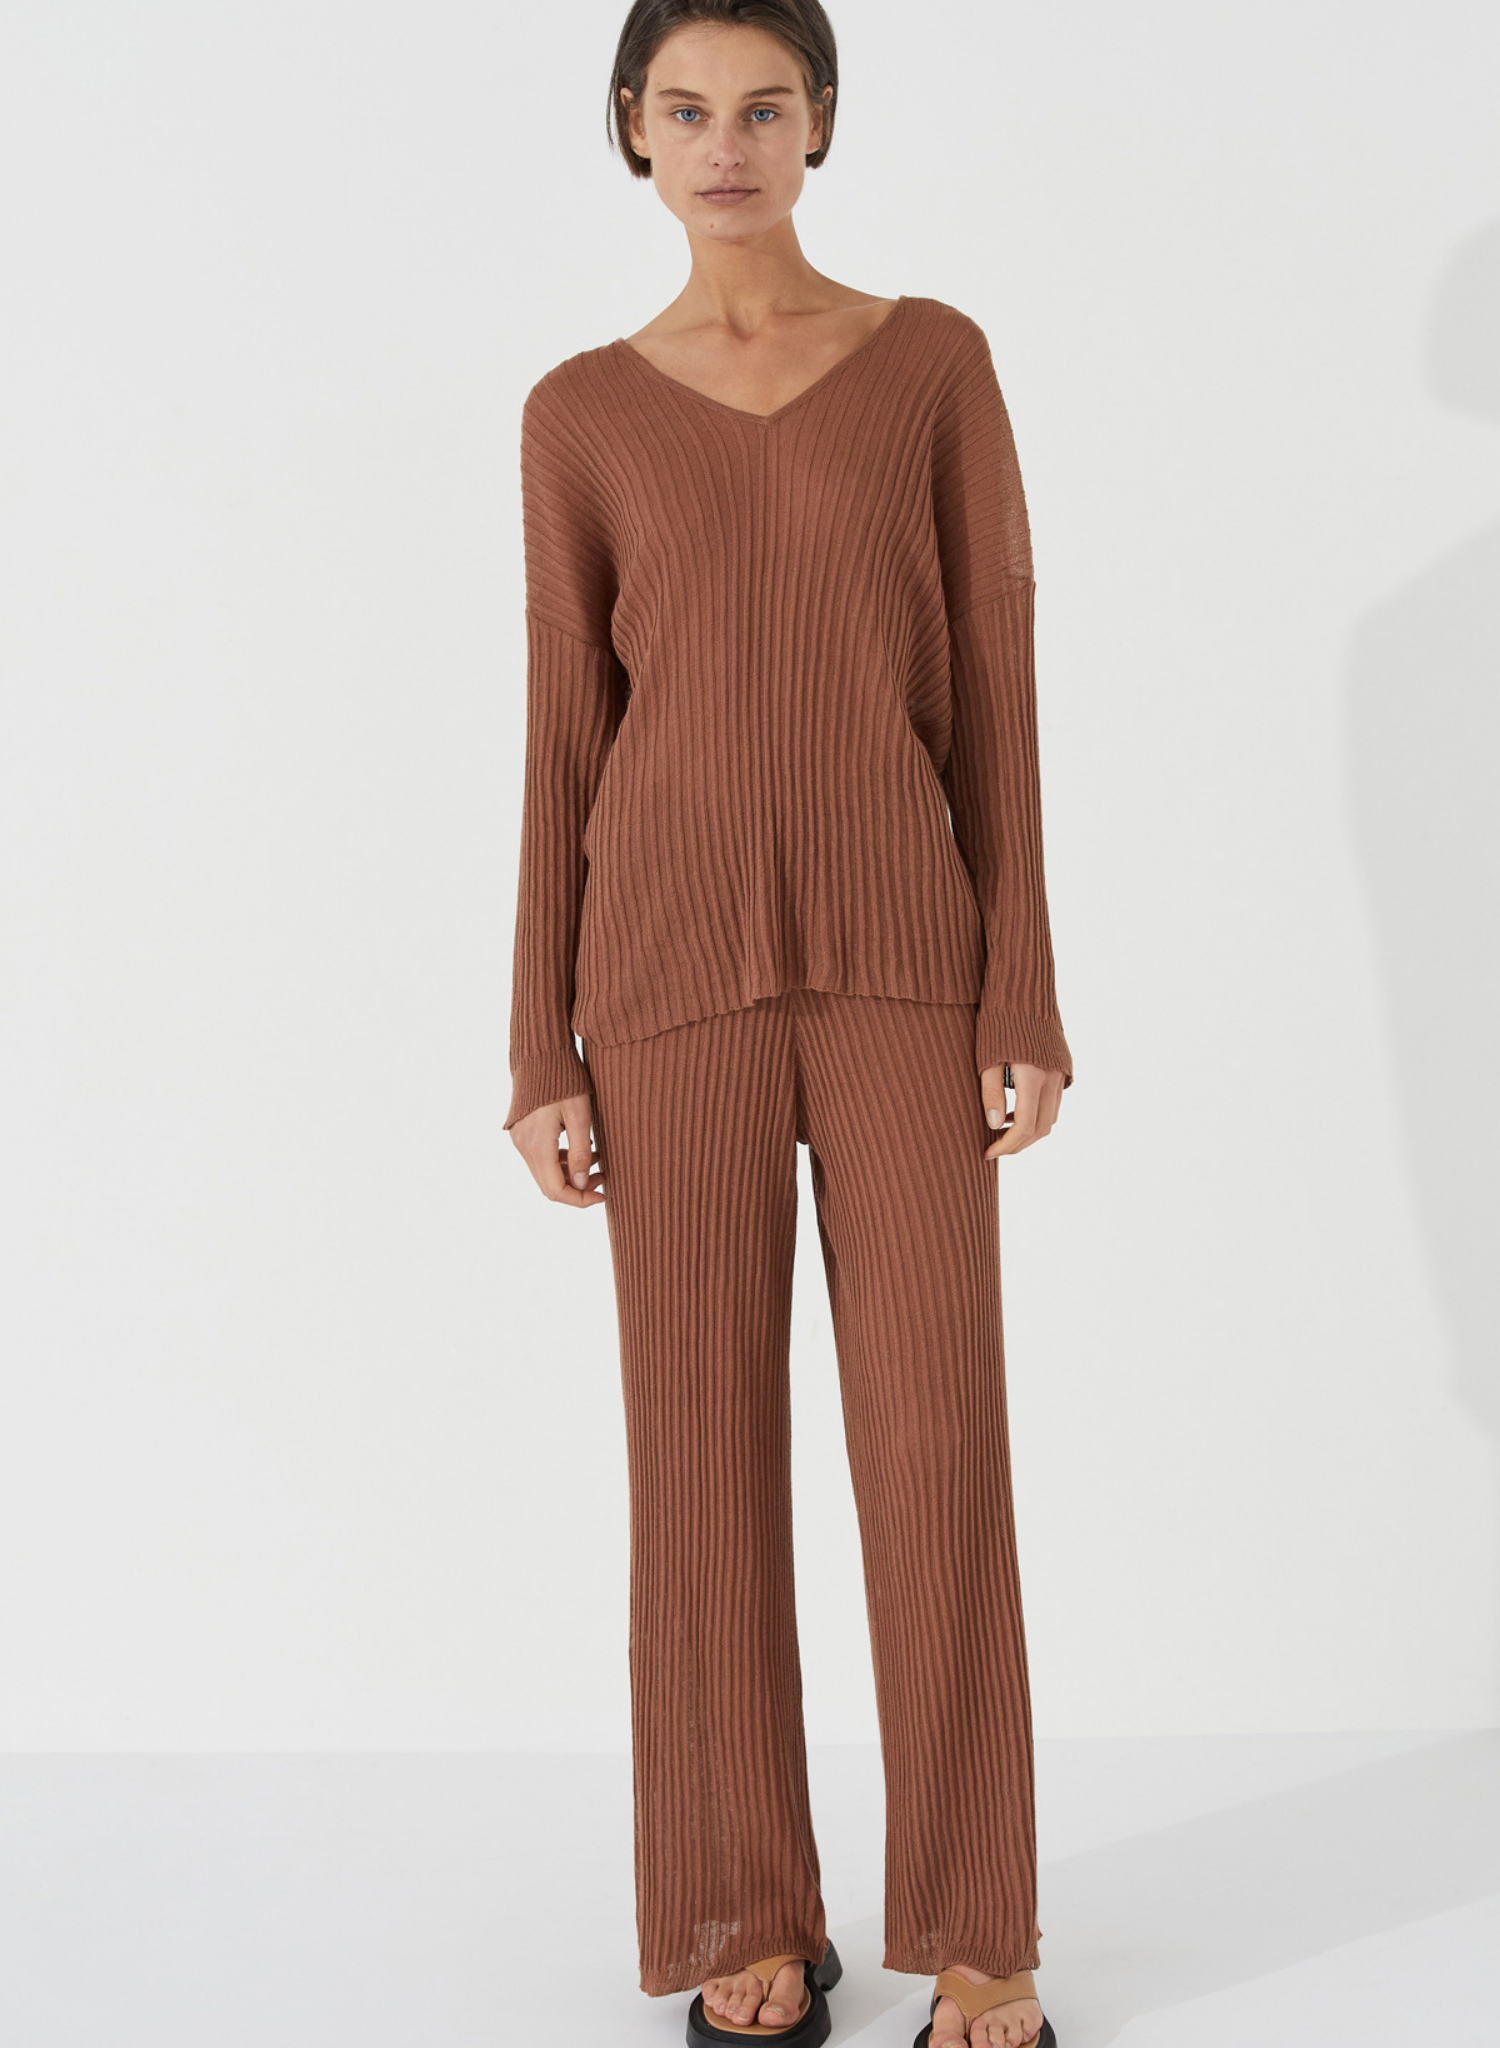 The Ribbed Knit Top by Zulu & Zephyr is a textured sheer fine knit, featuring a casual long sleeve with drop shoulder, and feminine V neckline. Inspired by the drape of tactile cloth and soft organic forms, this transeasonal essential may be paired with the coordinating Ribbed Knit Pants.